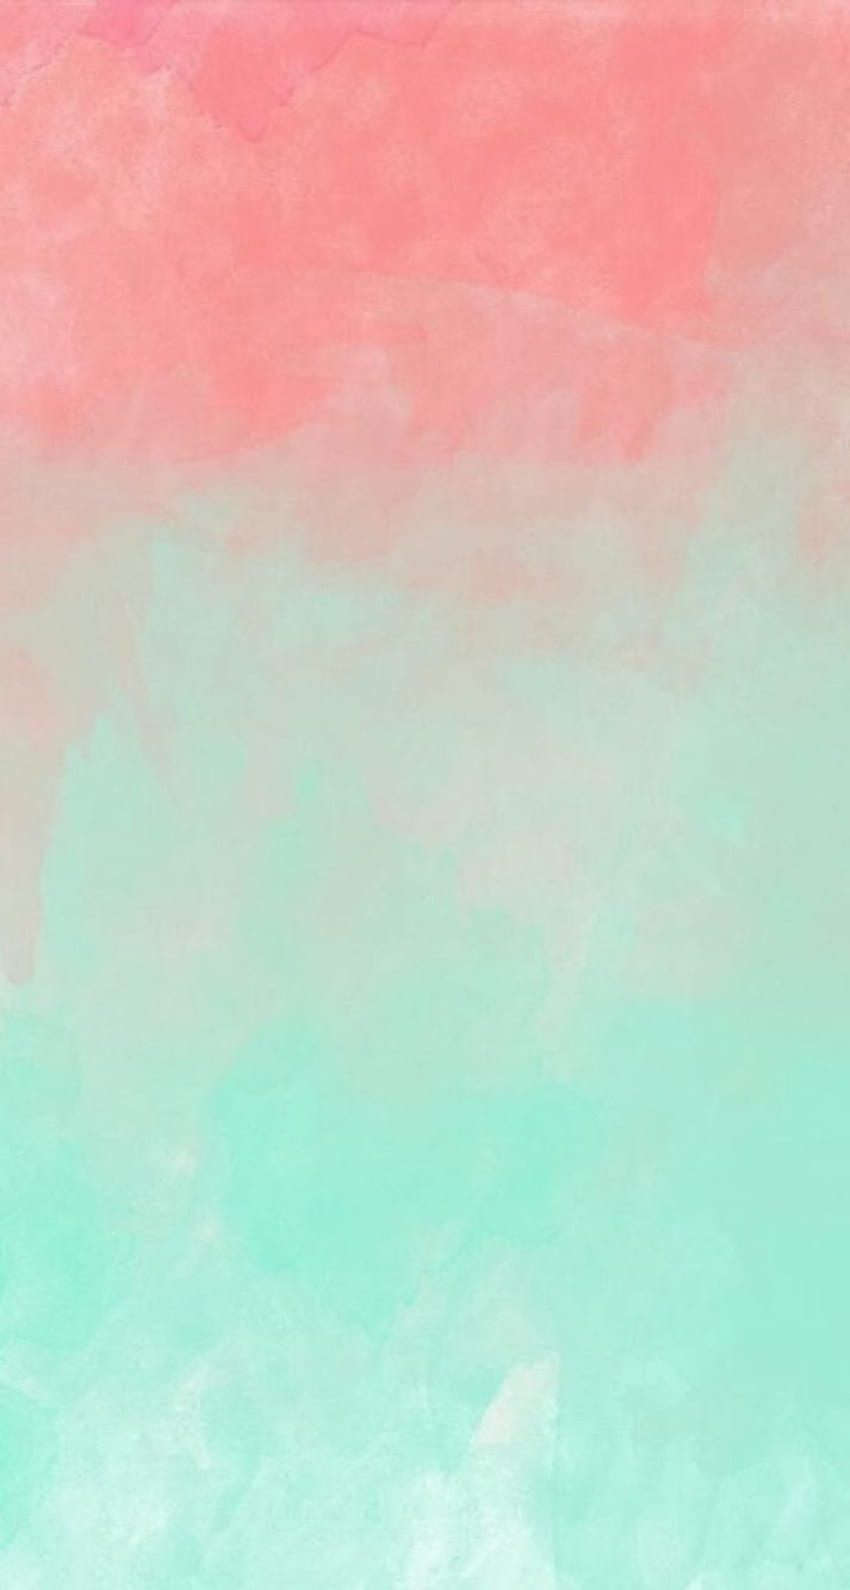 result for coral and mint. Reference., Coral and Teal HD phone wallpaper